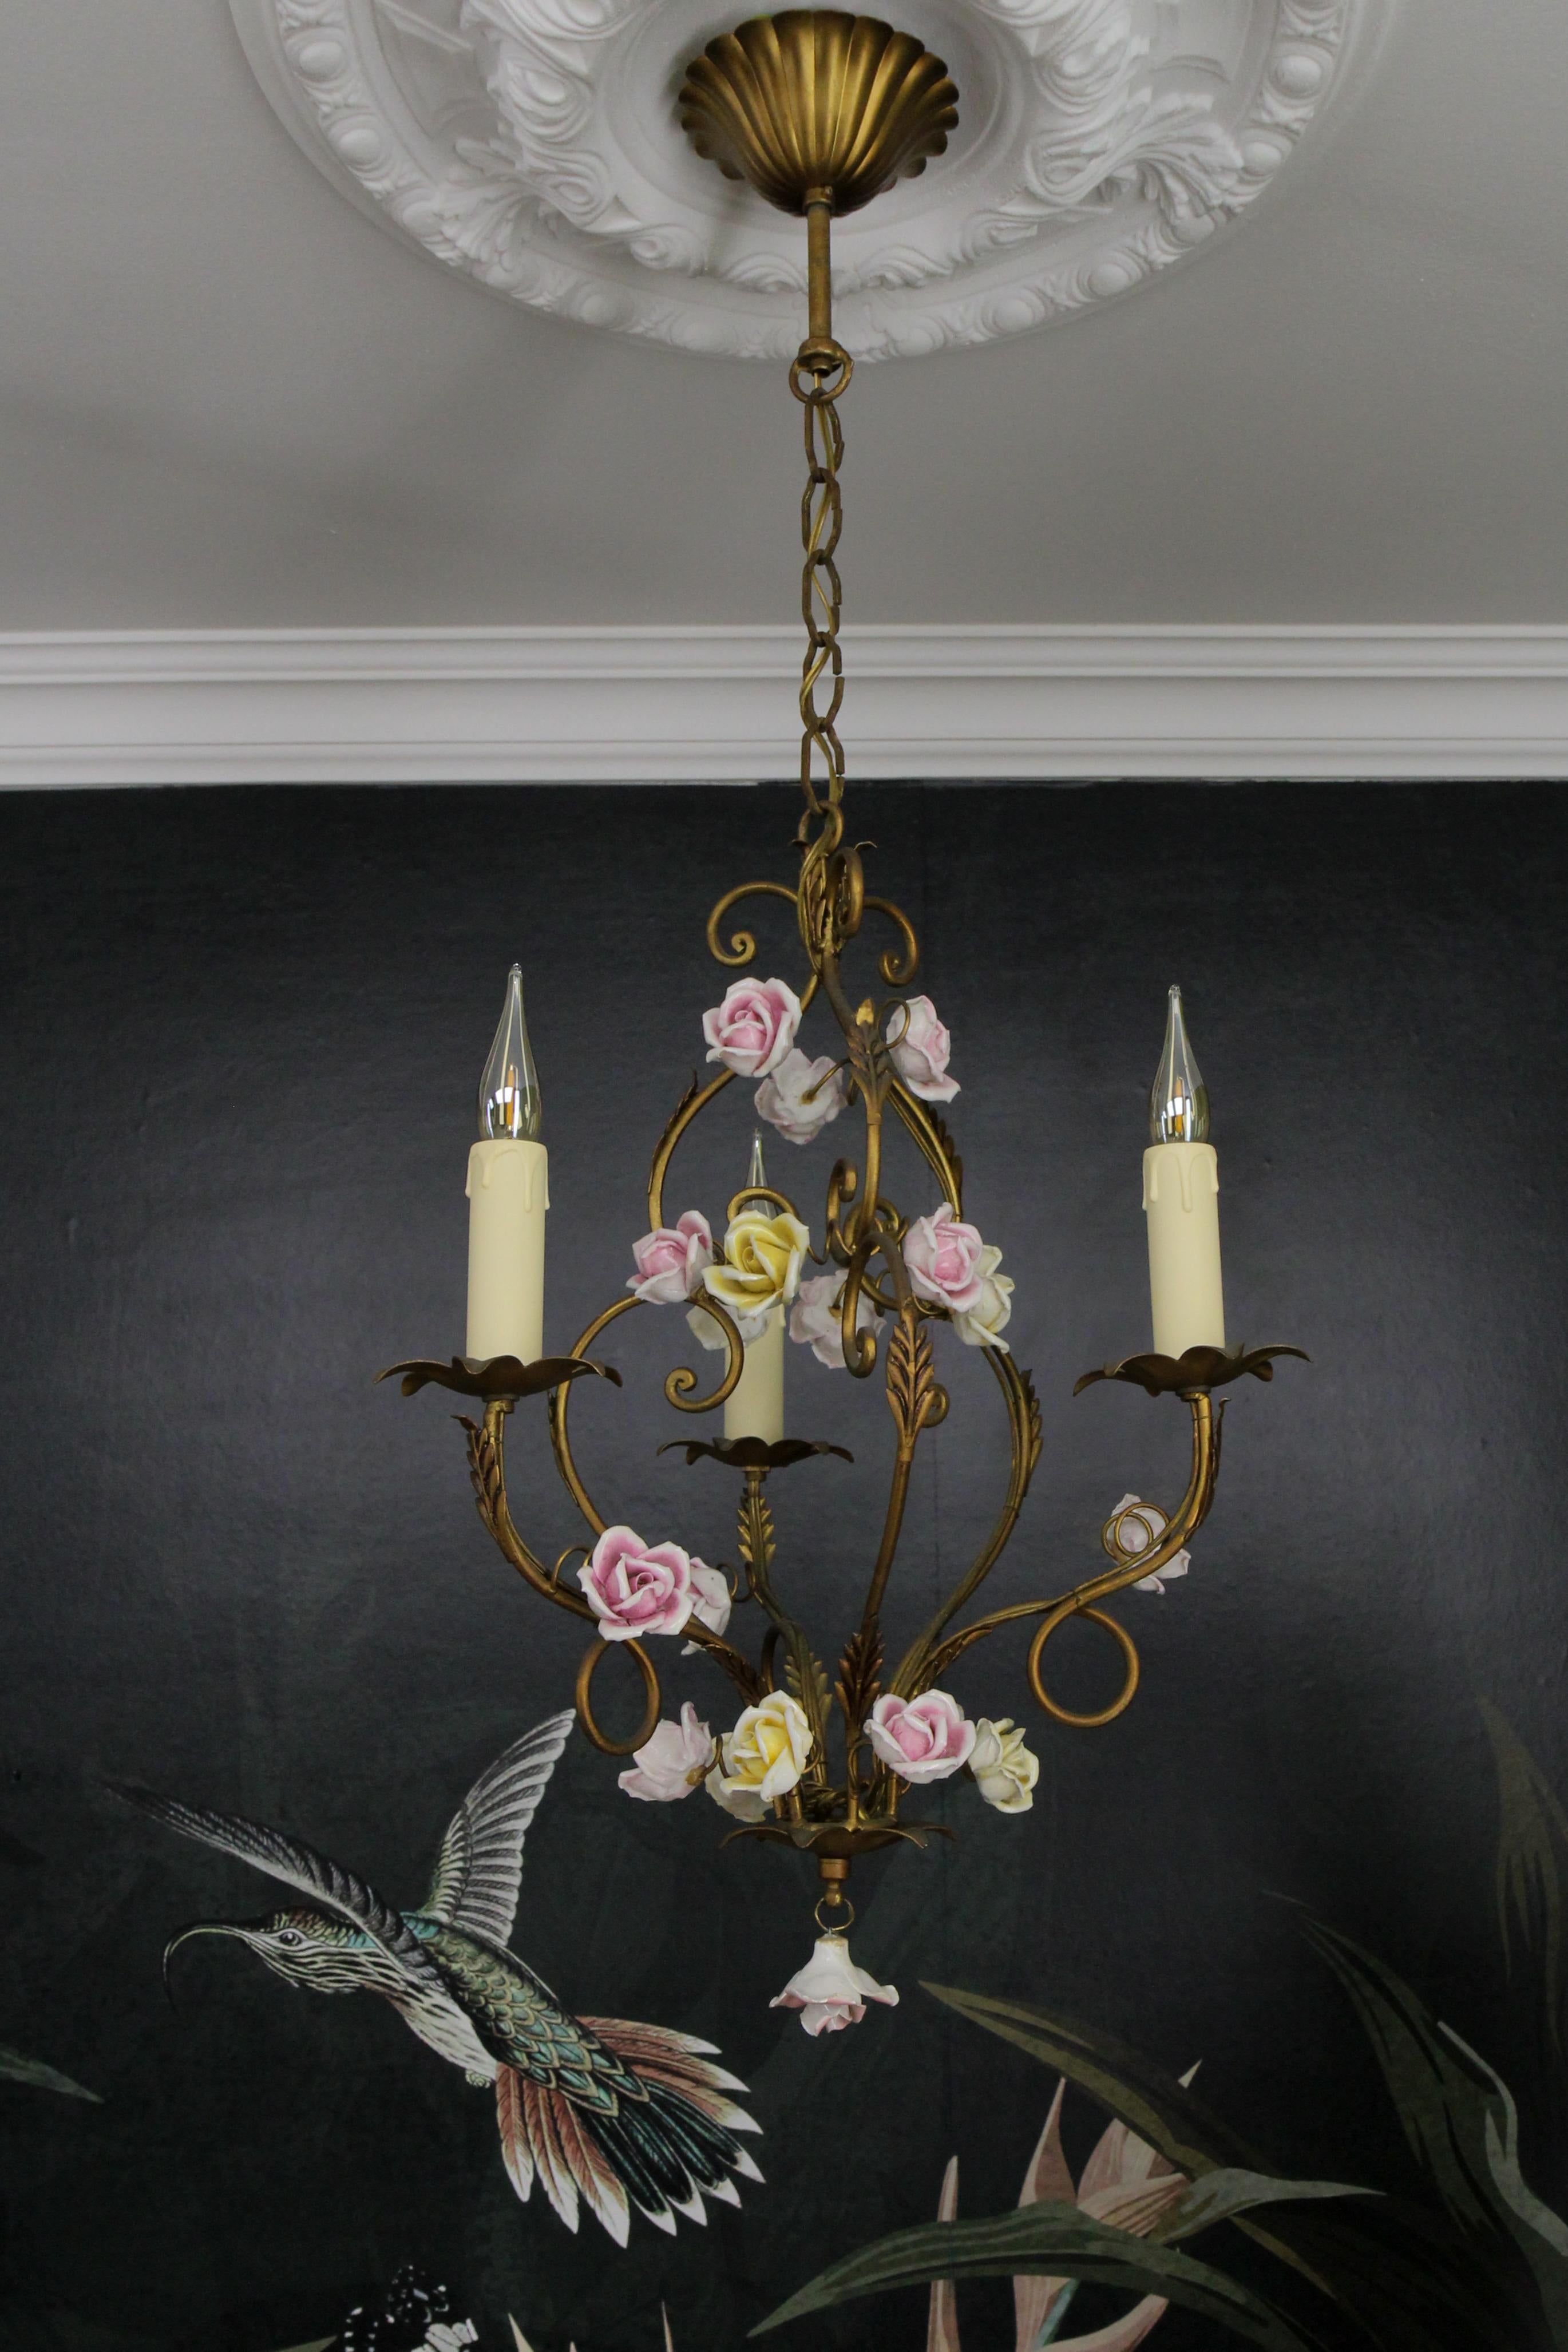 Italian golden color metal and porcelain flower three-light chandelier from the circa 1970s.
This adorable Hollywood Regency-style chandelier features three chandelier arms each with a socket for an E14-size light bulb. The beautifully shaped golden